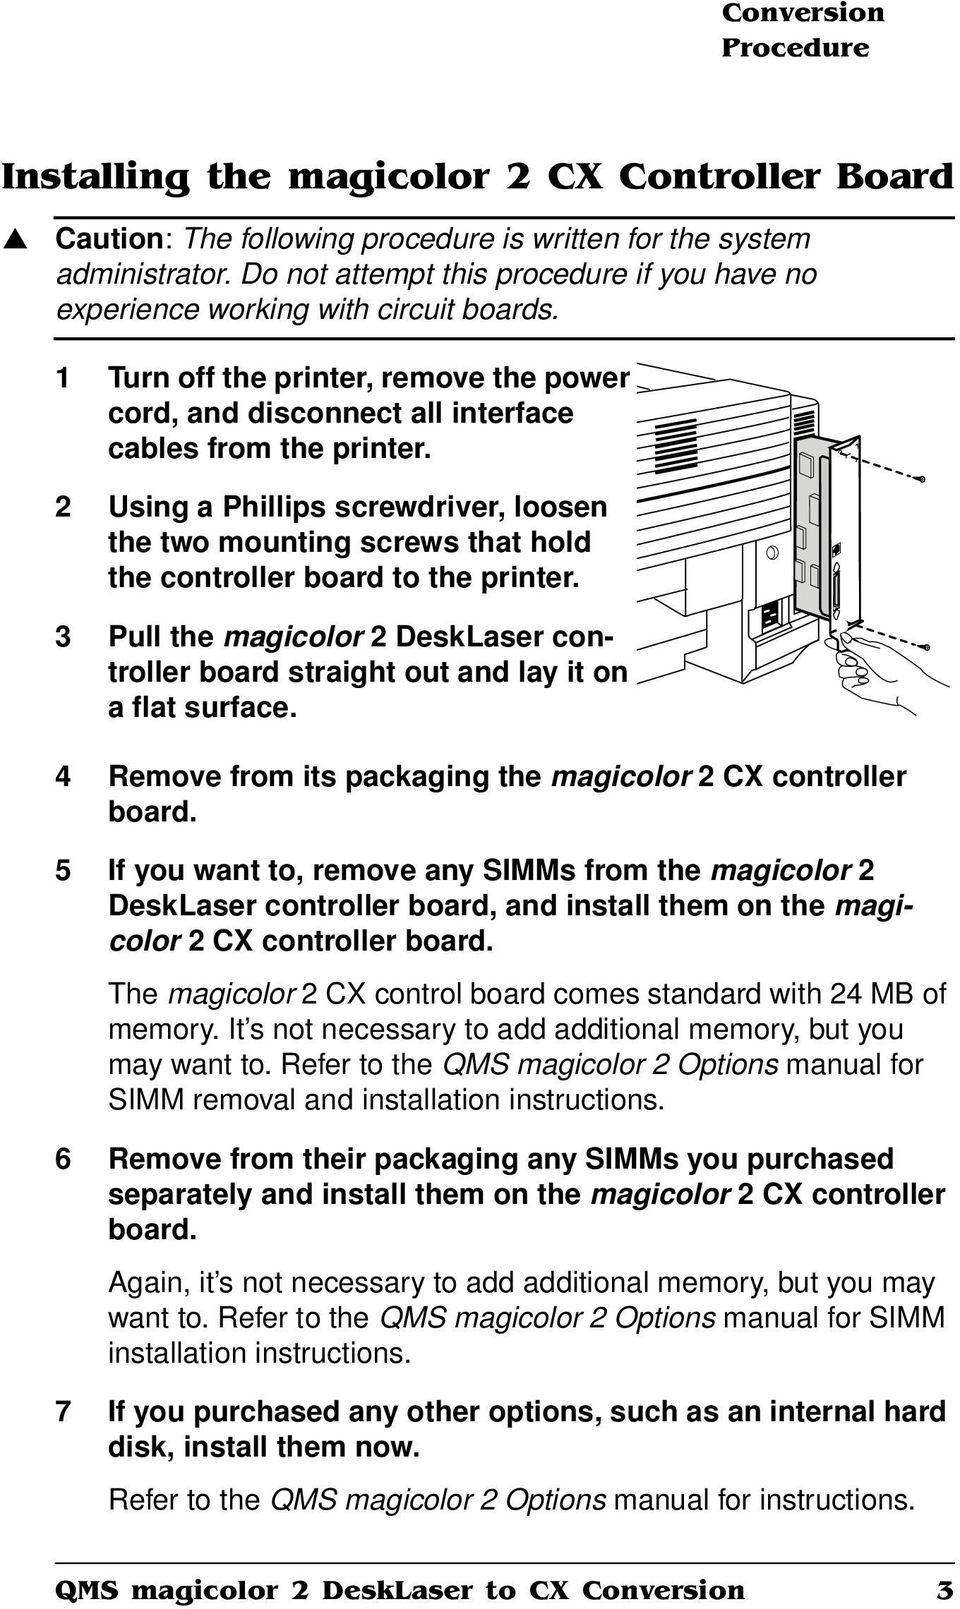 2 Usig a Phillips screwdriver, loose the two moutig screws that hold the cotroller board to the priter. 3 Pull the magicolor 2 DeskLaser cotroller board straight out ad lay it o a flat surface.